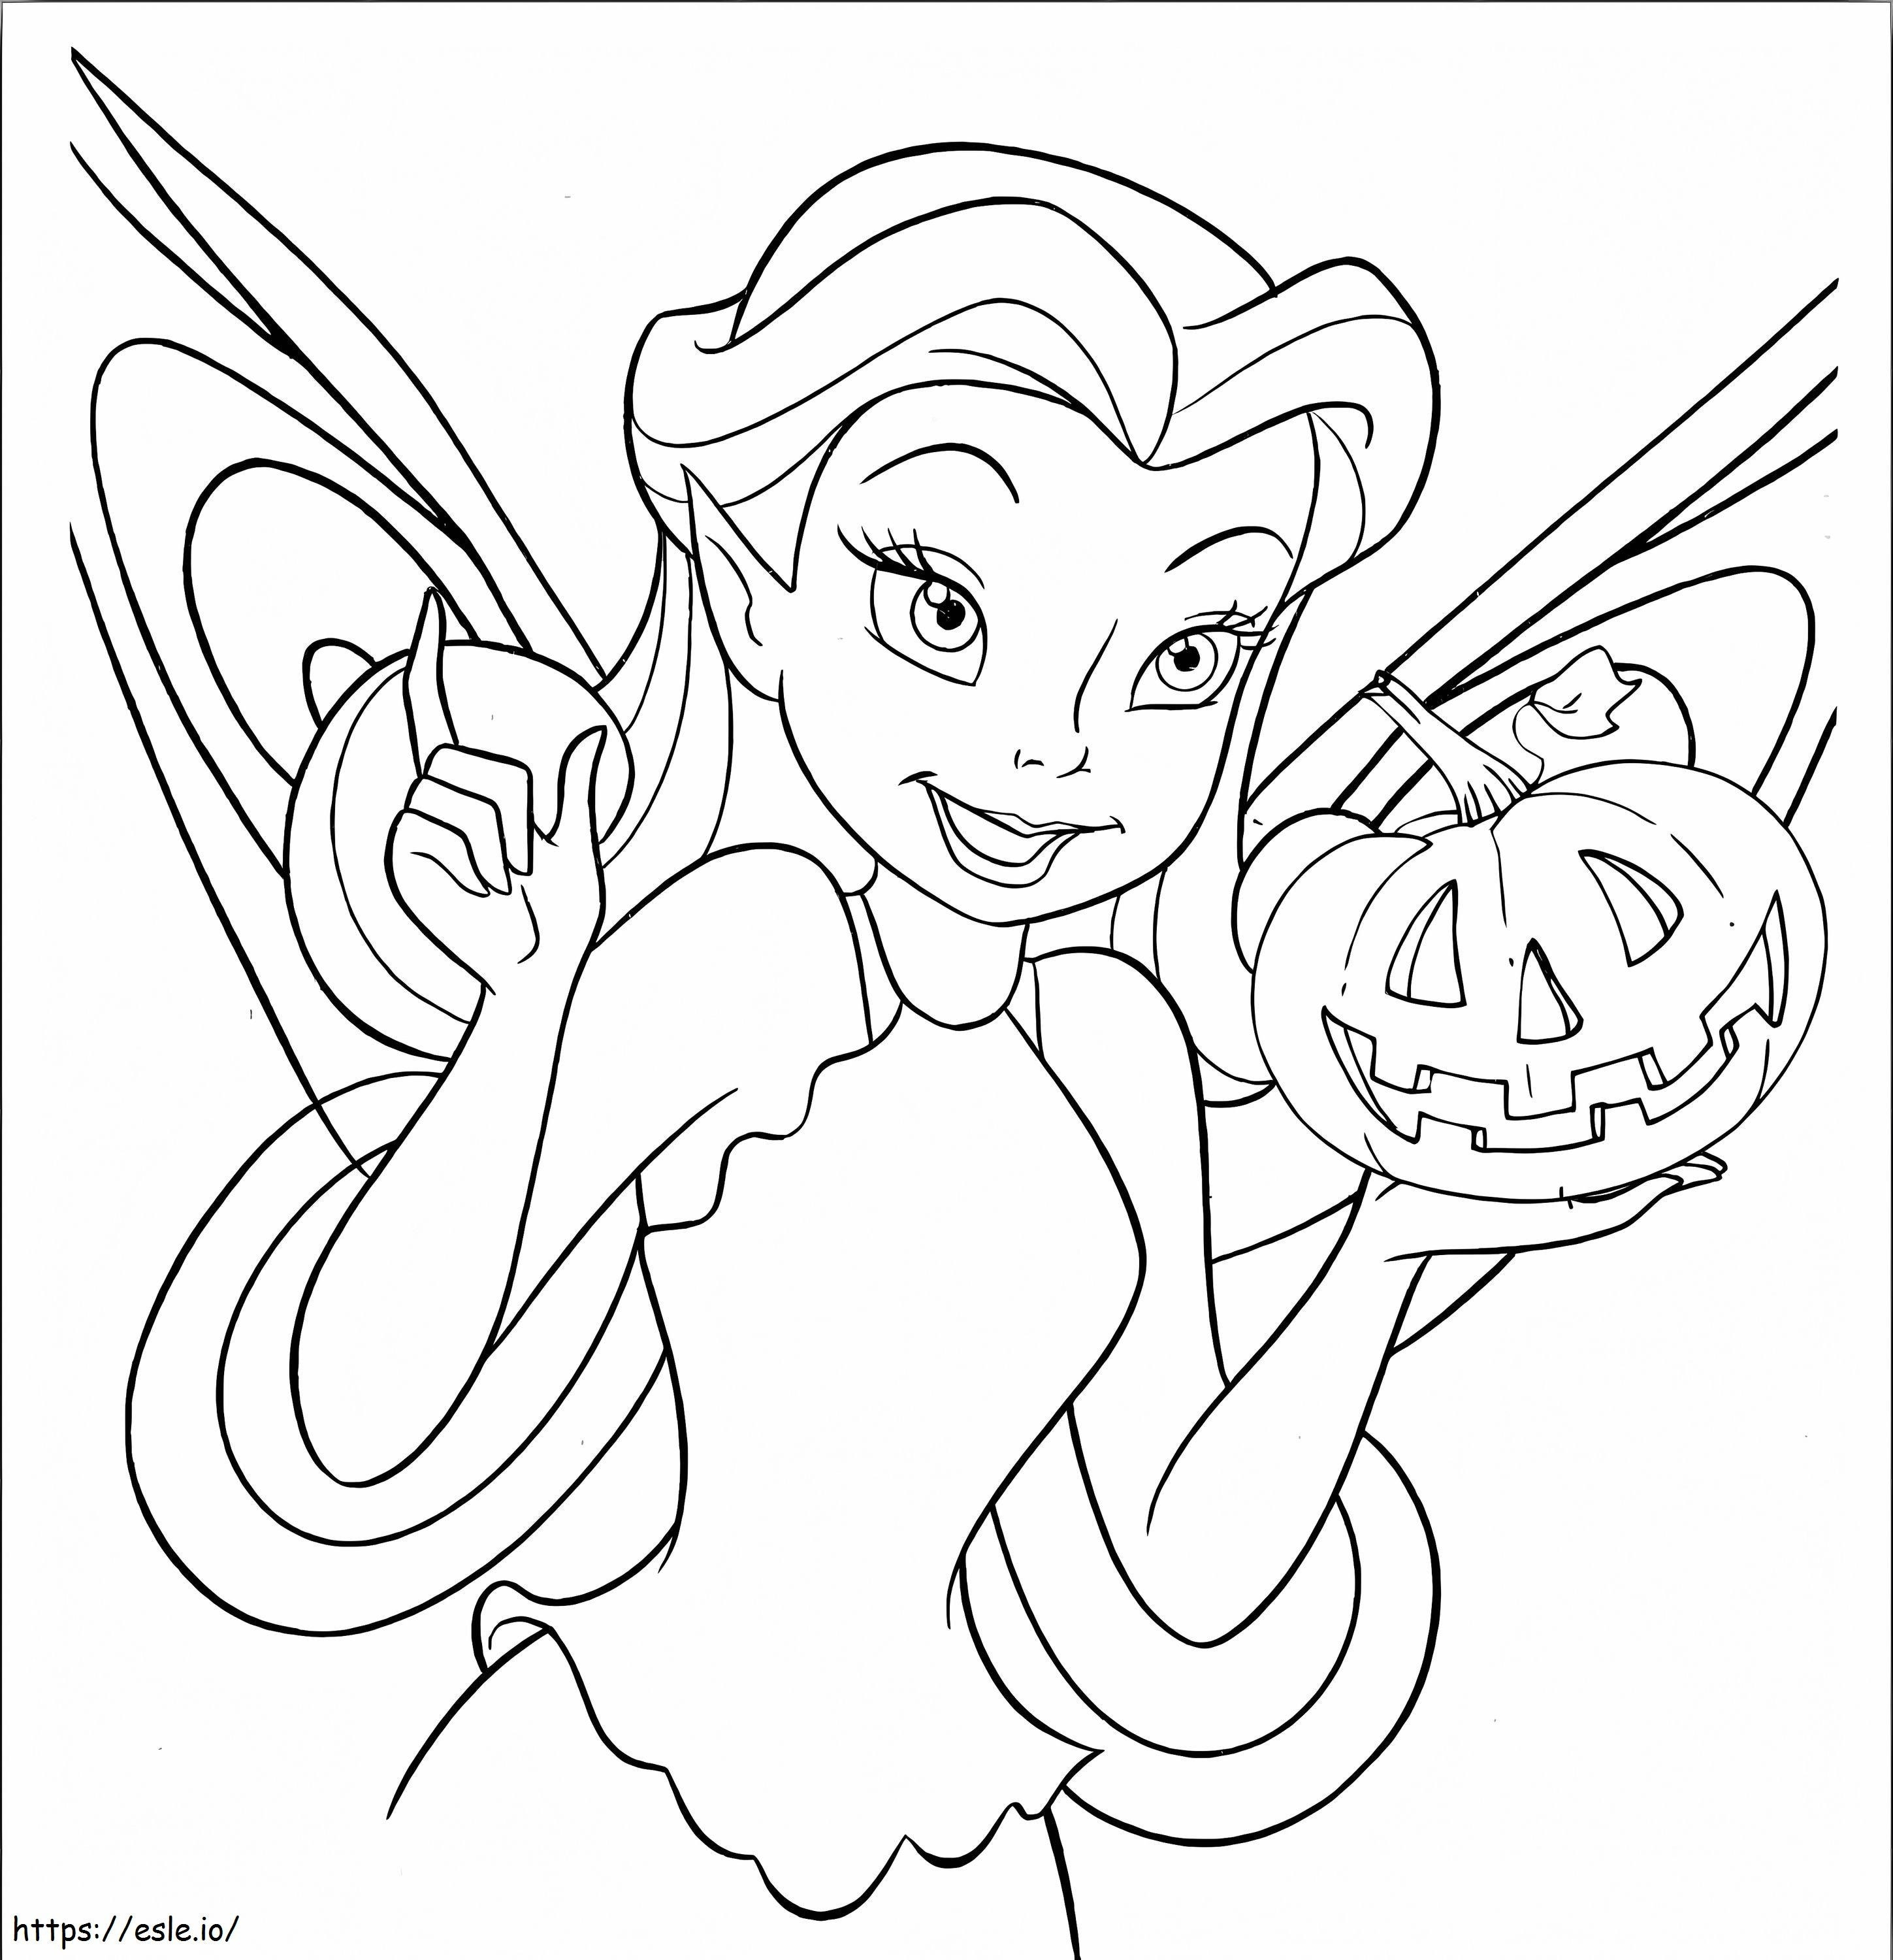 Fairy Holding Pumpkin coloring page